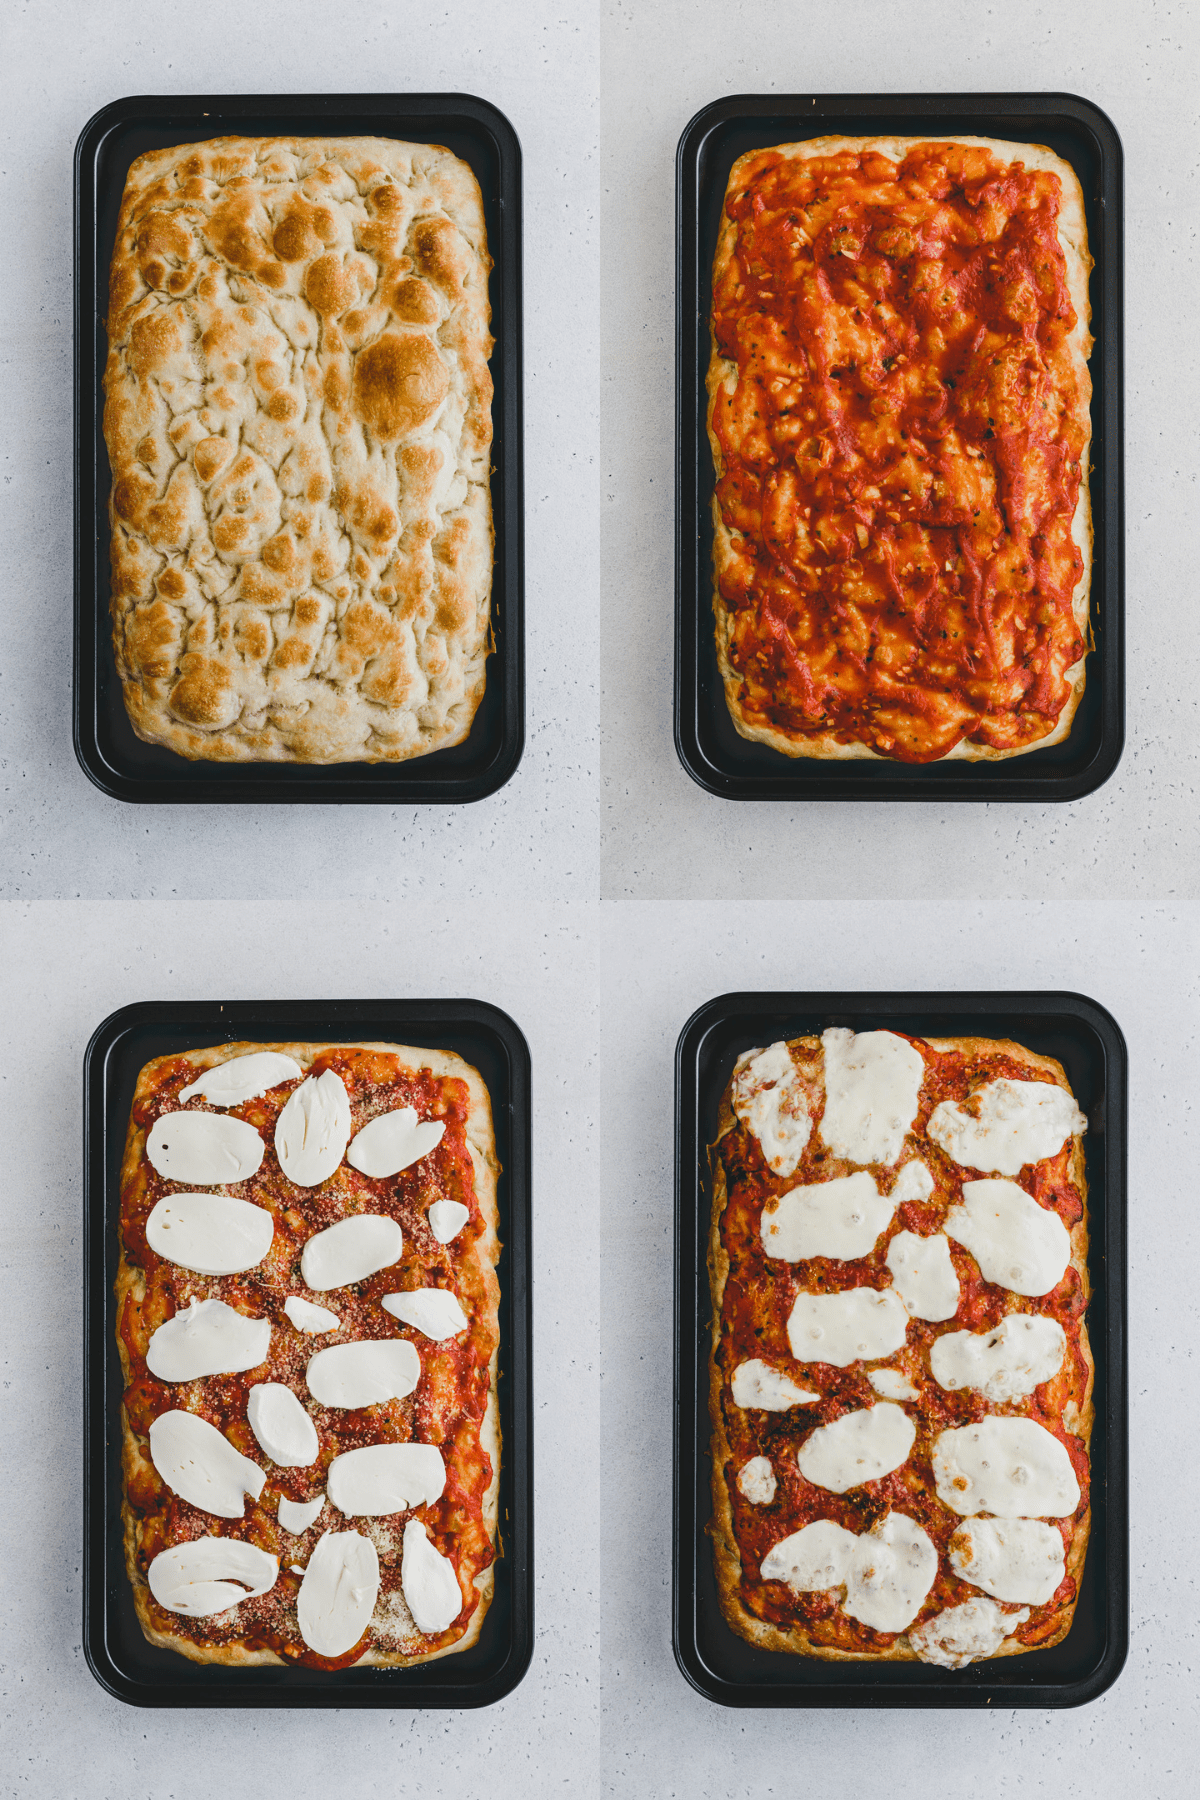 Top view of Focaccia Pizza making process in four pictures, from pre-baked, to having tomato sauce on it, then with mozzarella on it, and then after it is baked. 